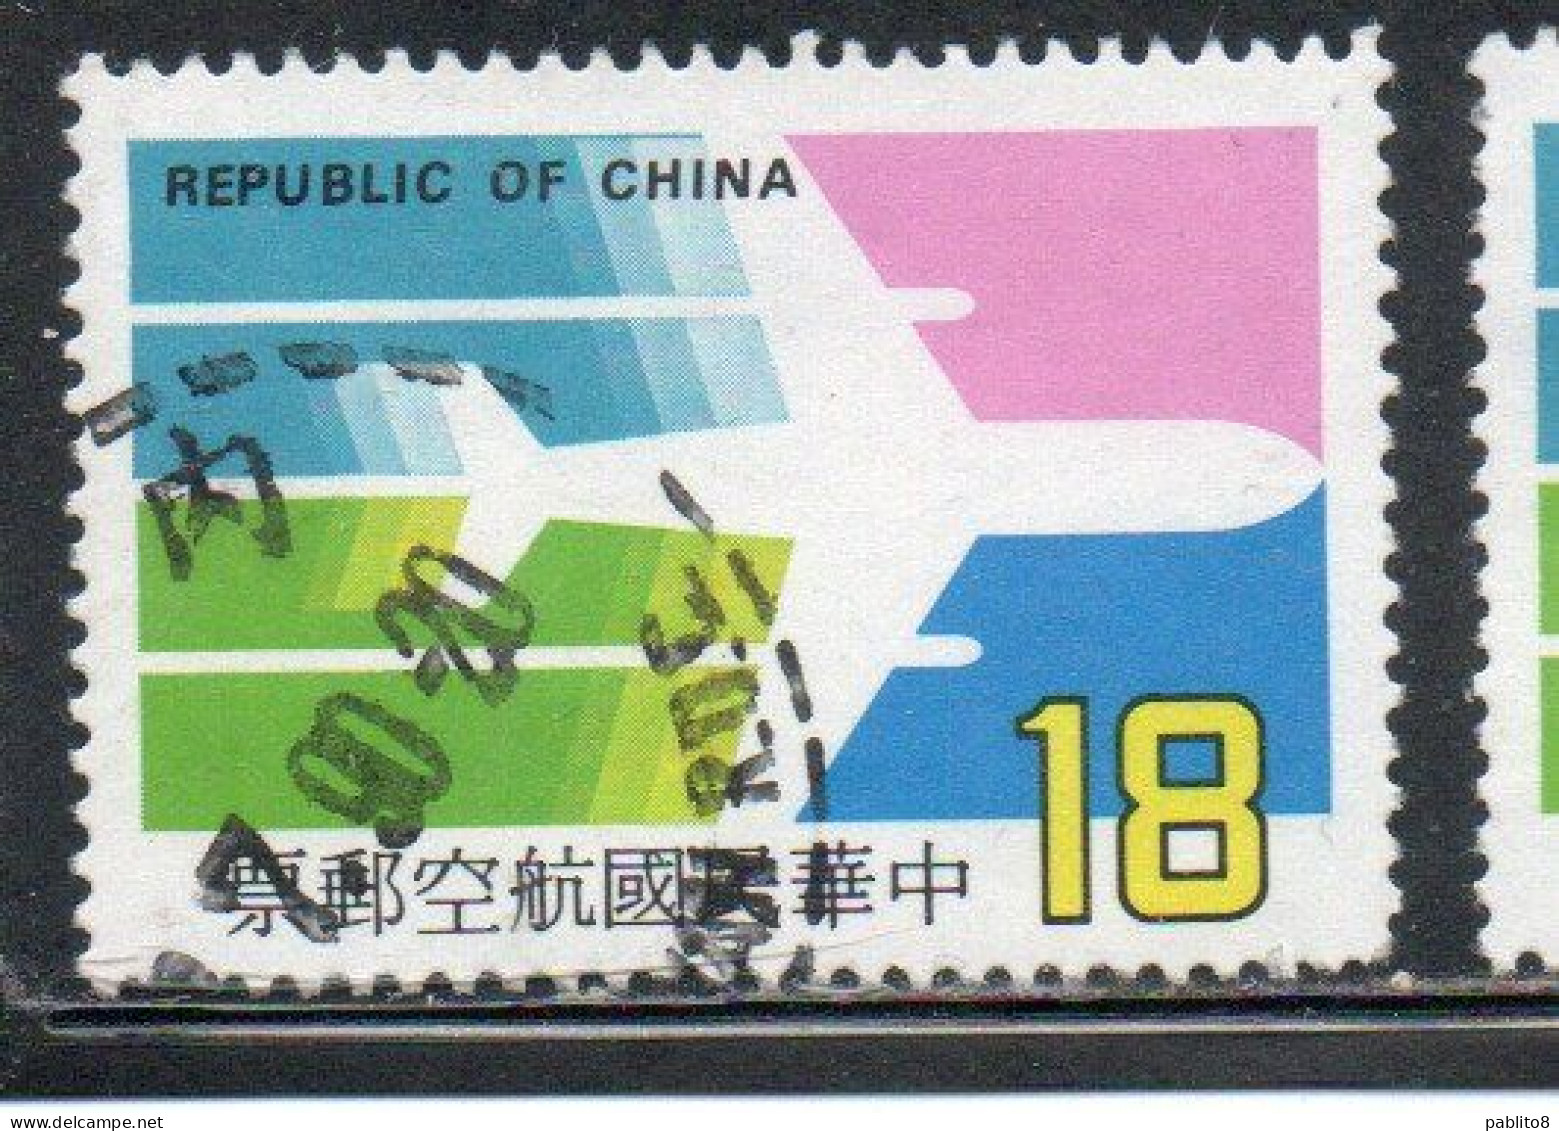 CHINA REPUBLIC CINA TAIWAN FORMOSA 1987 AIR POST MAIL AIRMAIL AIRPLANE 18$ USED USATO OBLITERE' - Luftpost